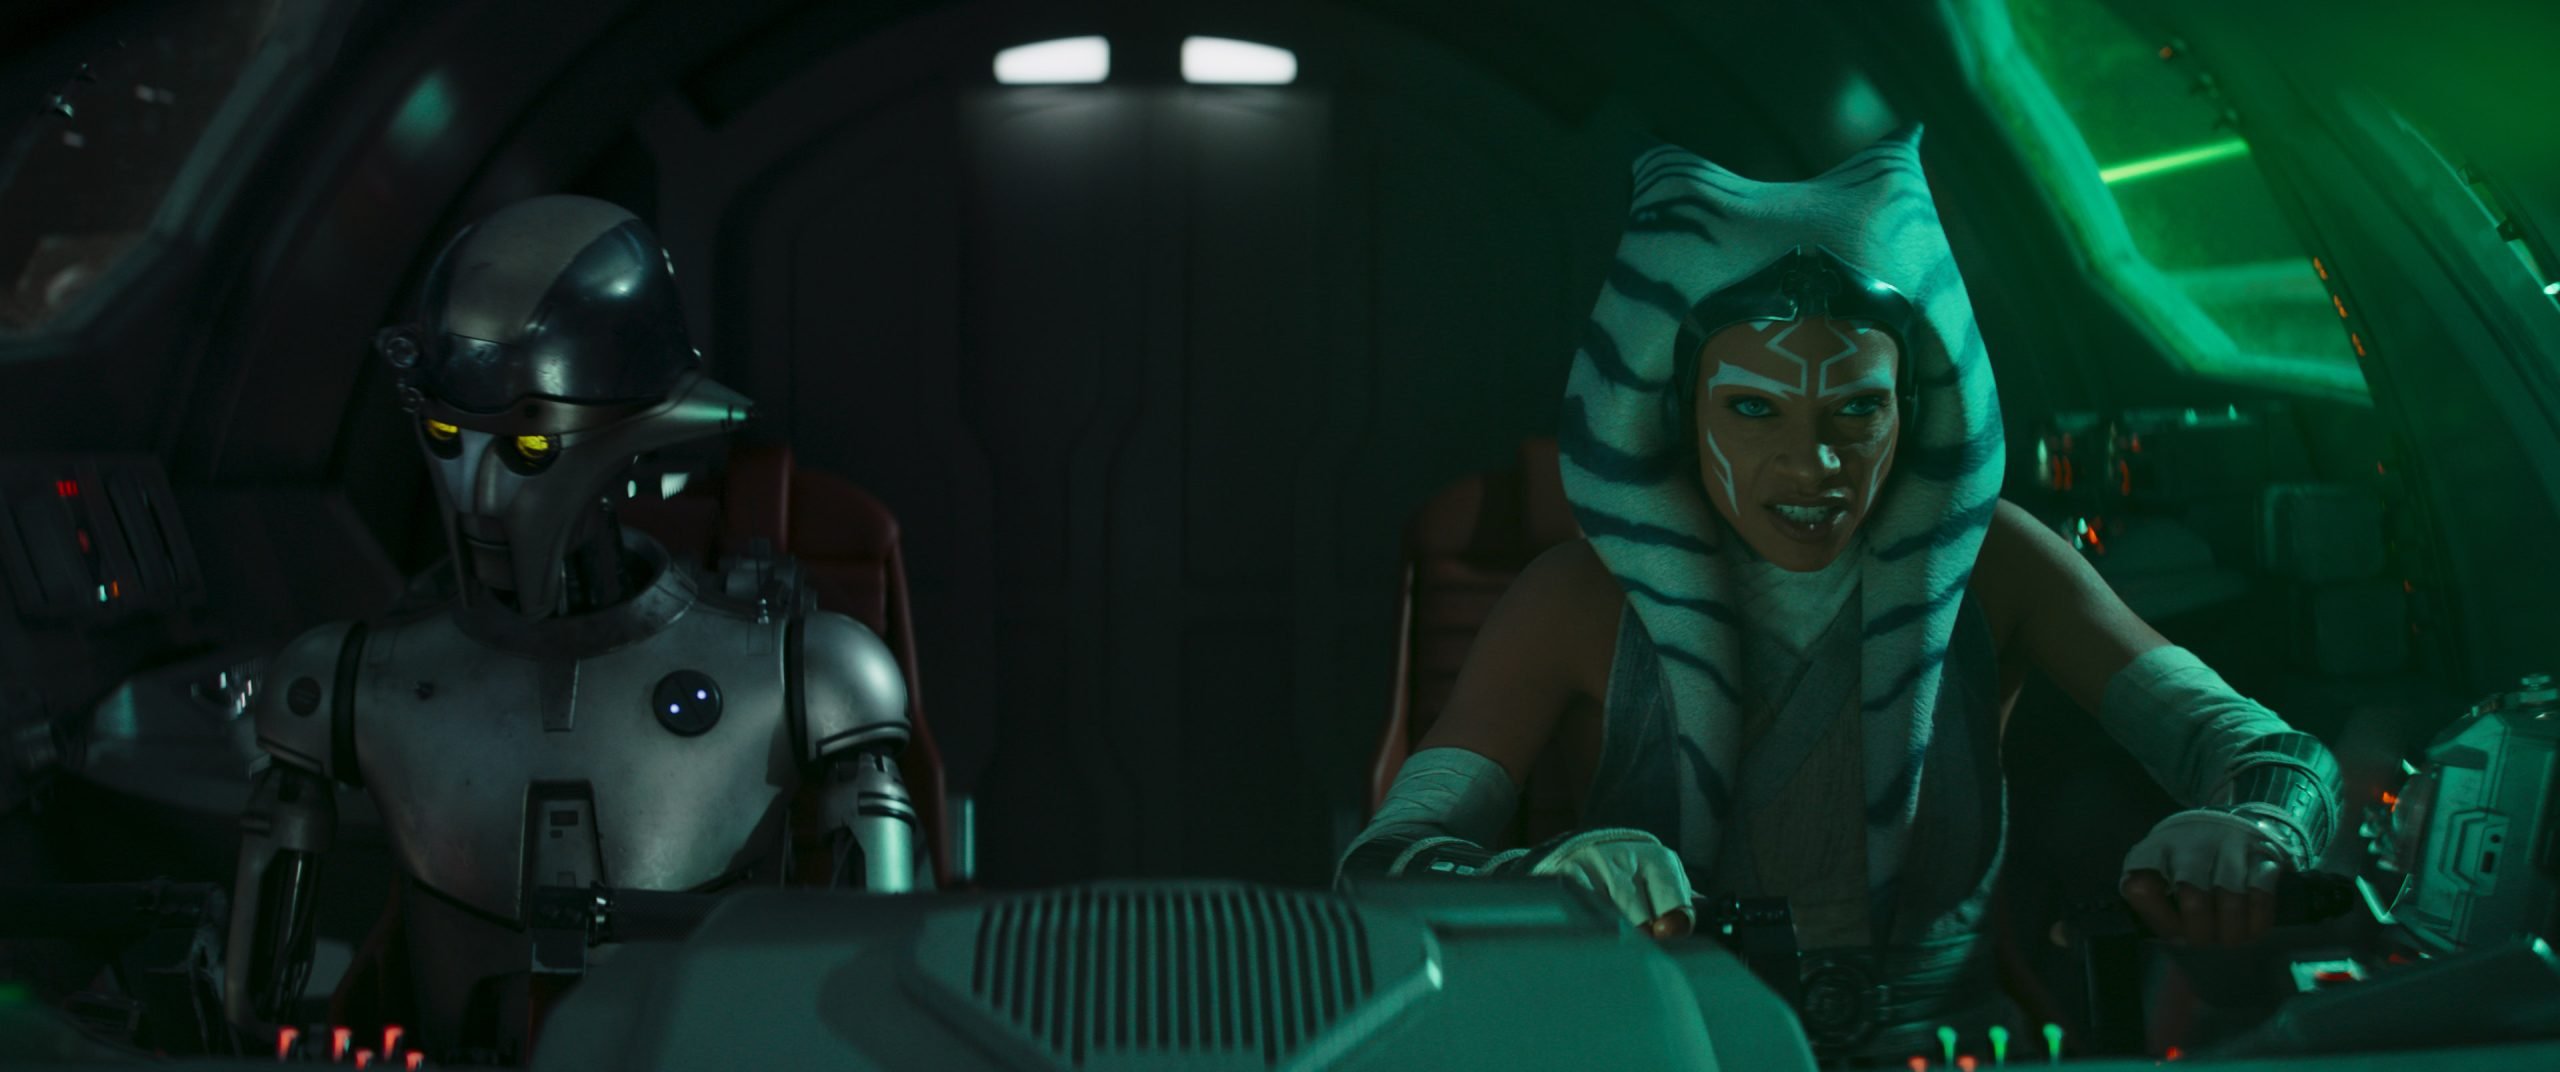 'Ahsoka' Part Seven "Dreams and Madness" Review: An Editing Mess That Begs the Question, What Was the Point? - Star Wars News Net